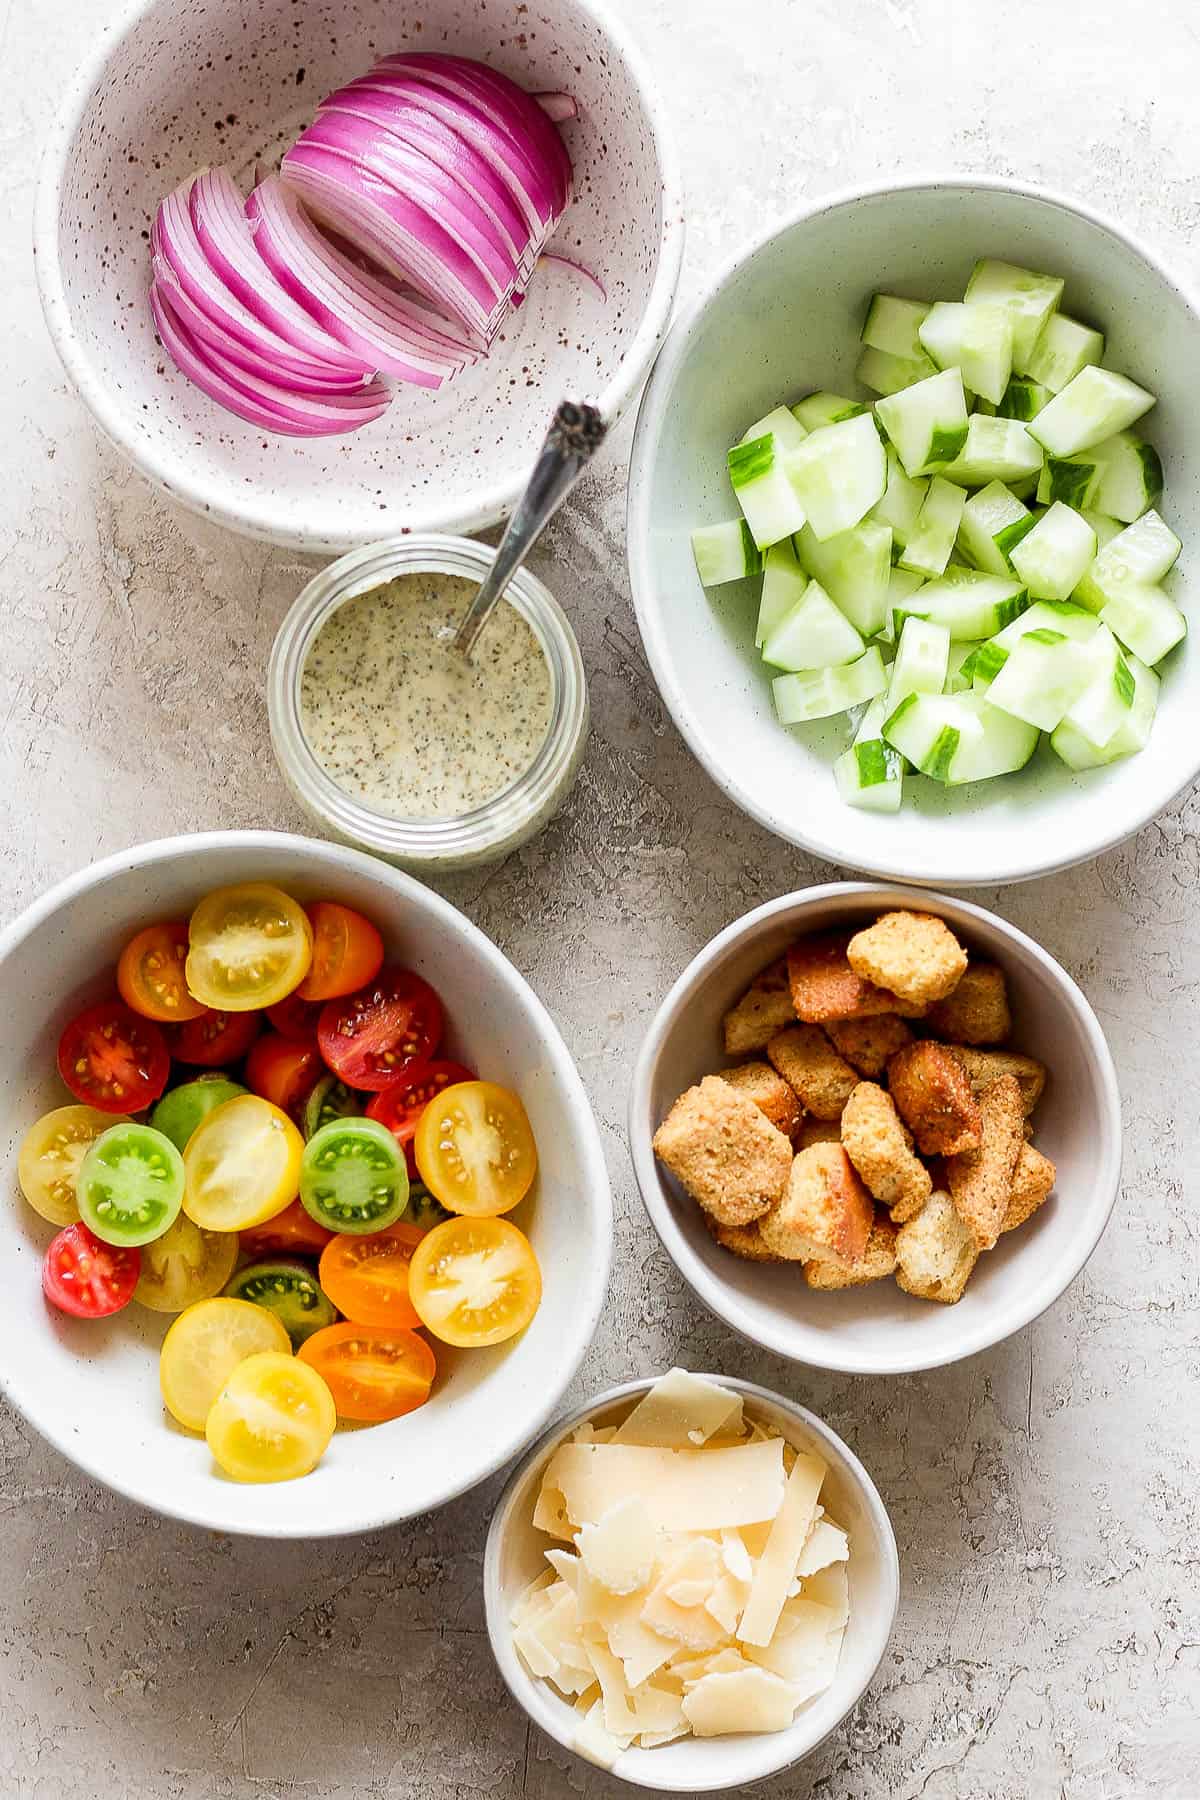 Fresh vegetables, croutons, and dressing in separate bowls.